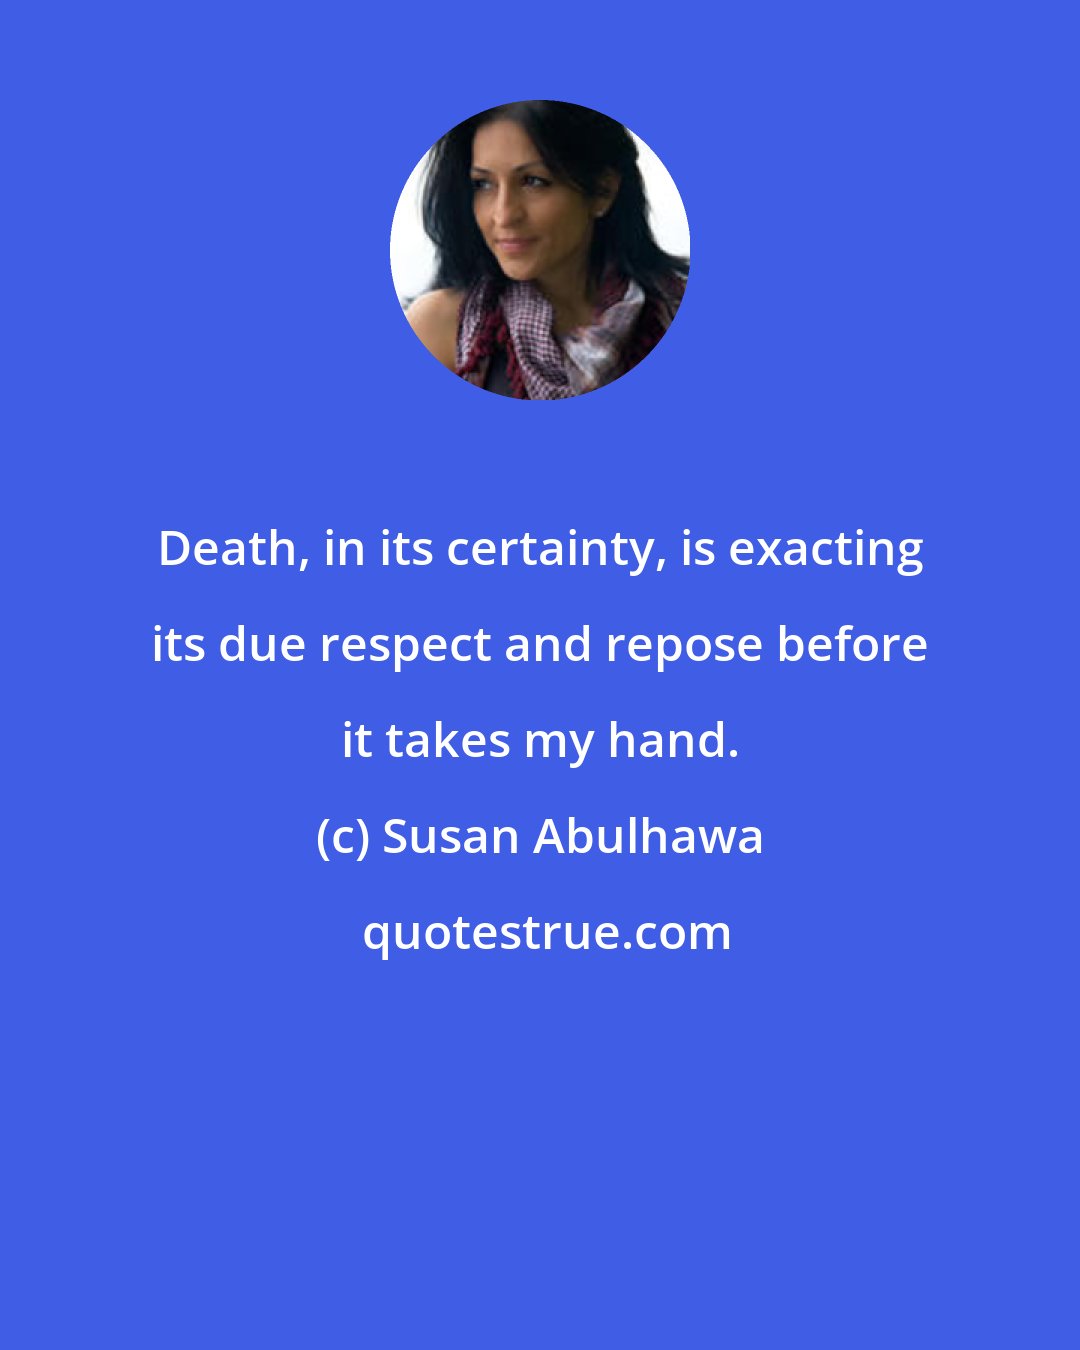 Susan Abulhawa: Death, in its certainty, is exacting its due respect and repose before it takes my hand.